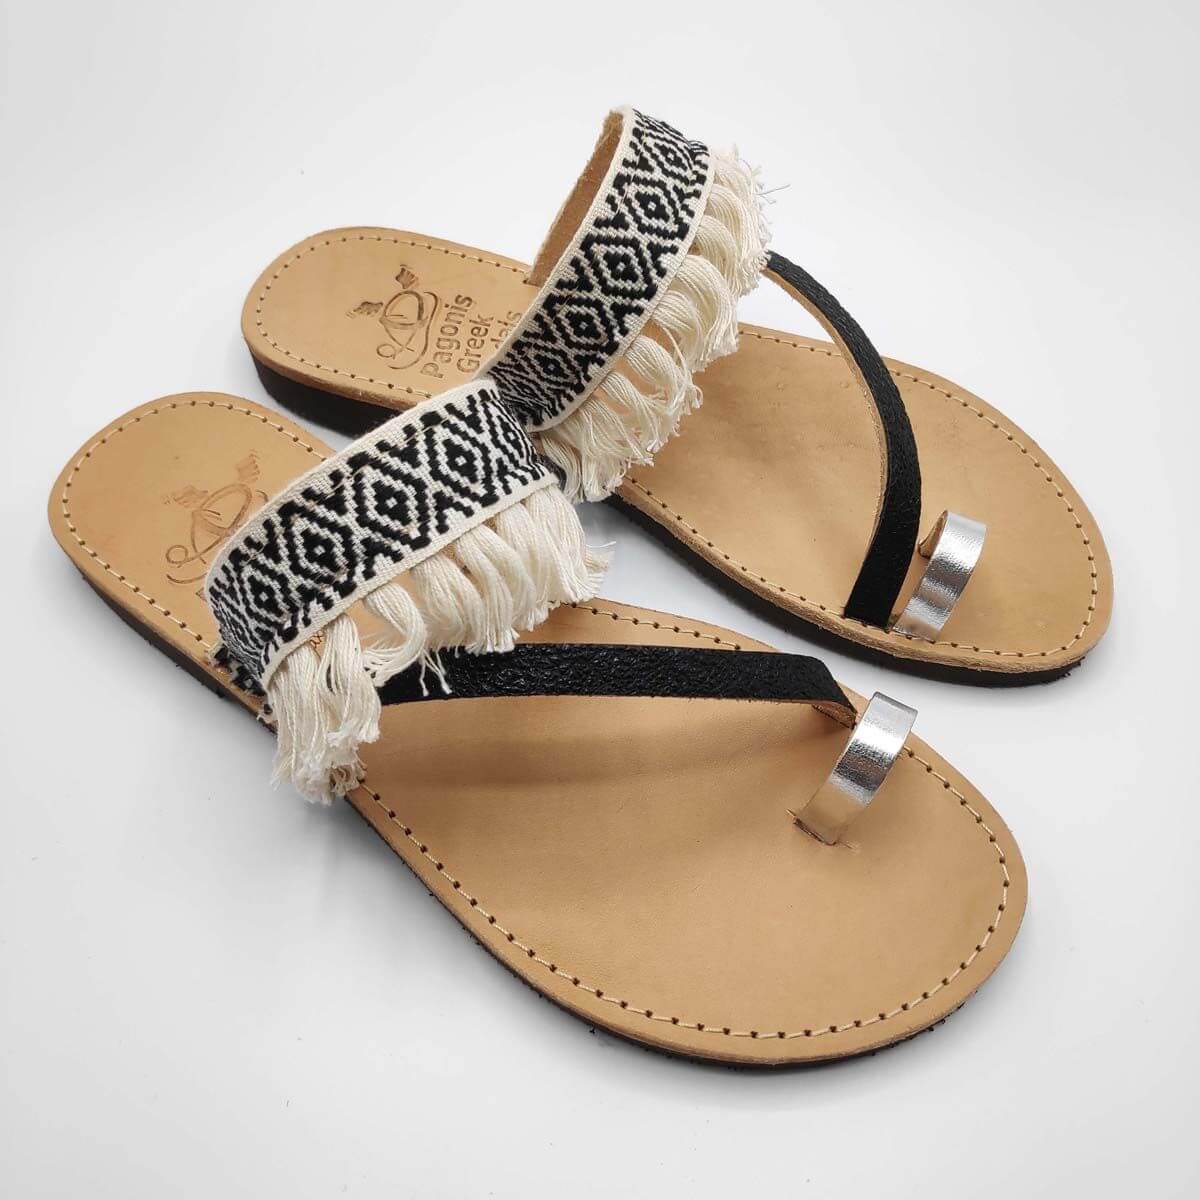 Black & White Fabric & Leather Boho Sandals with Fringes | Comi Boho | Pagonis Greek Sandals